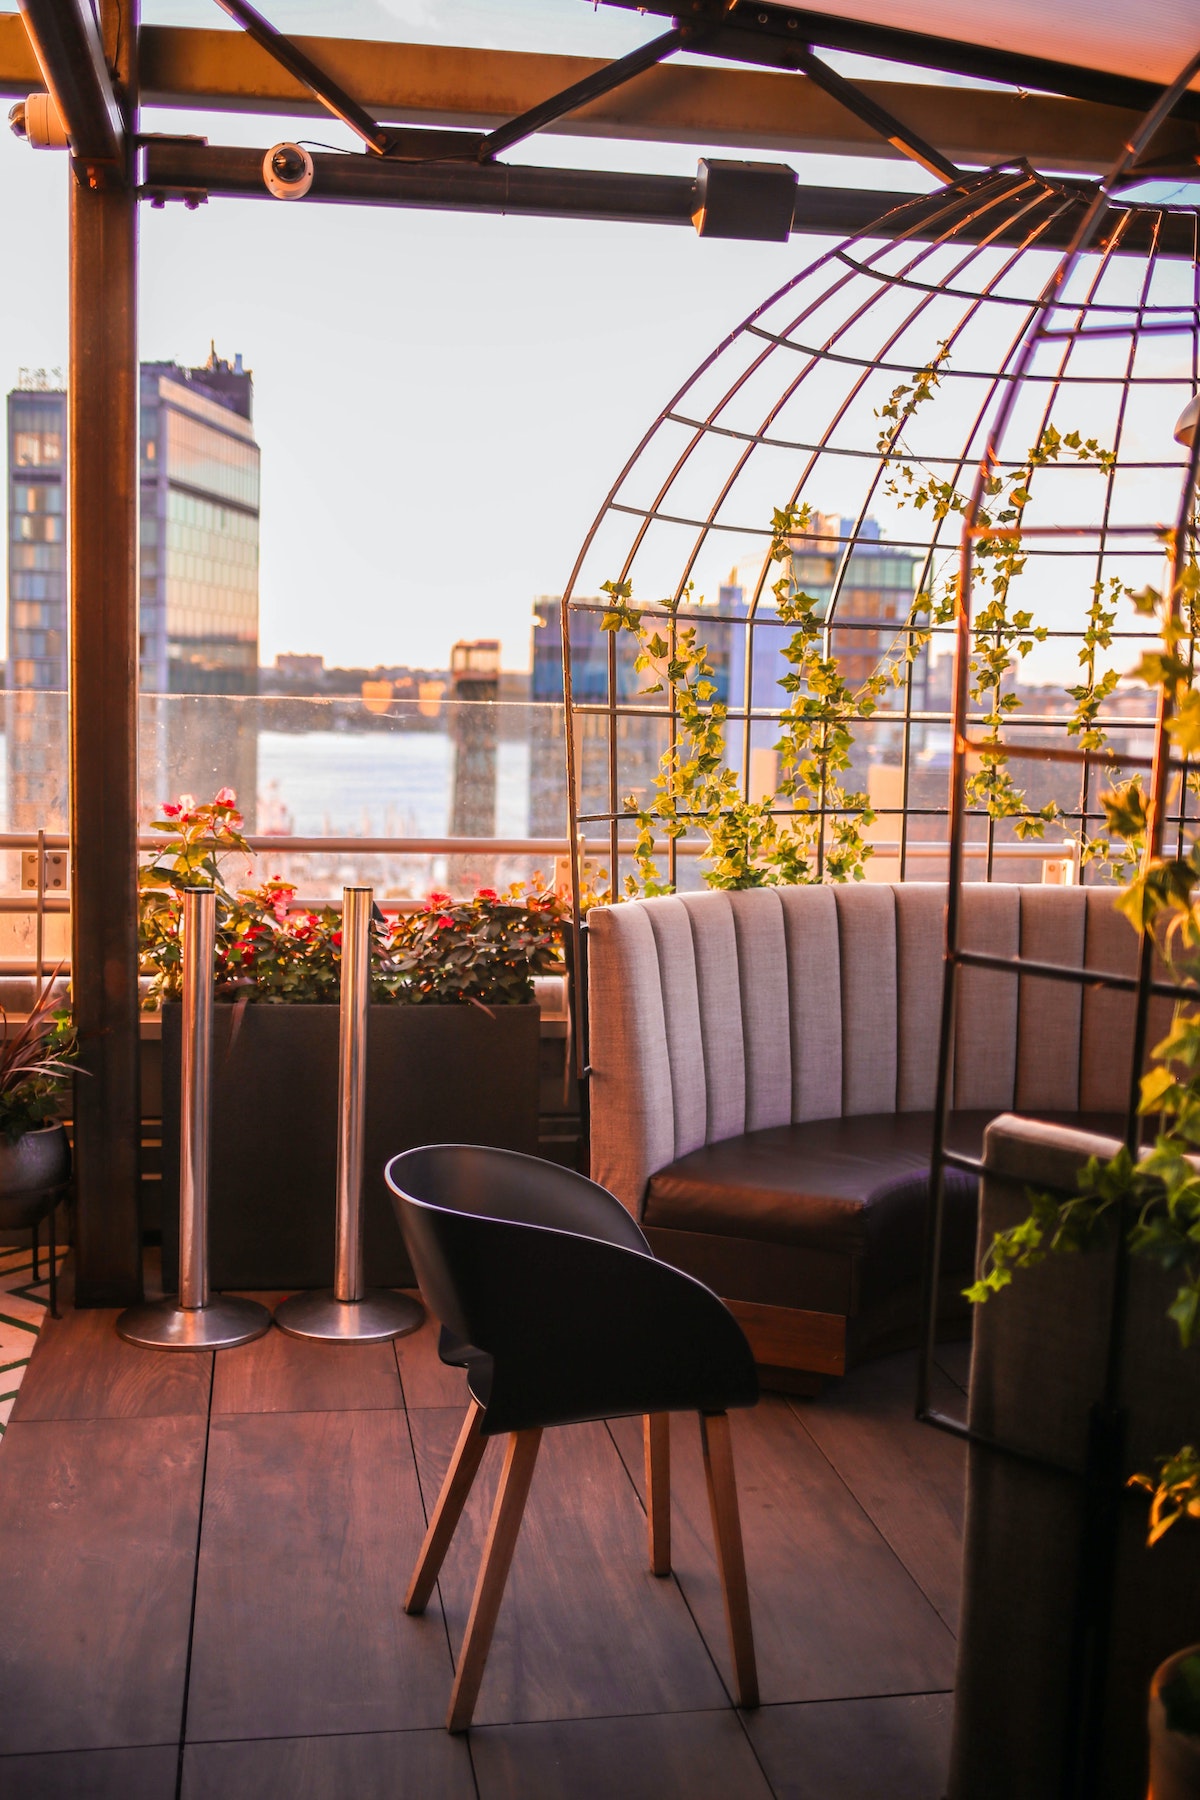 Booth at a rooftop bar decorated with plants and flowers